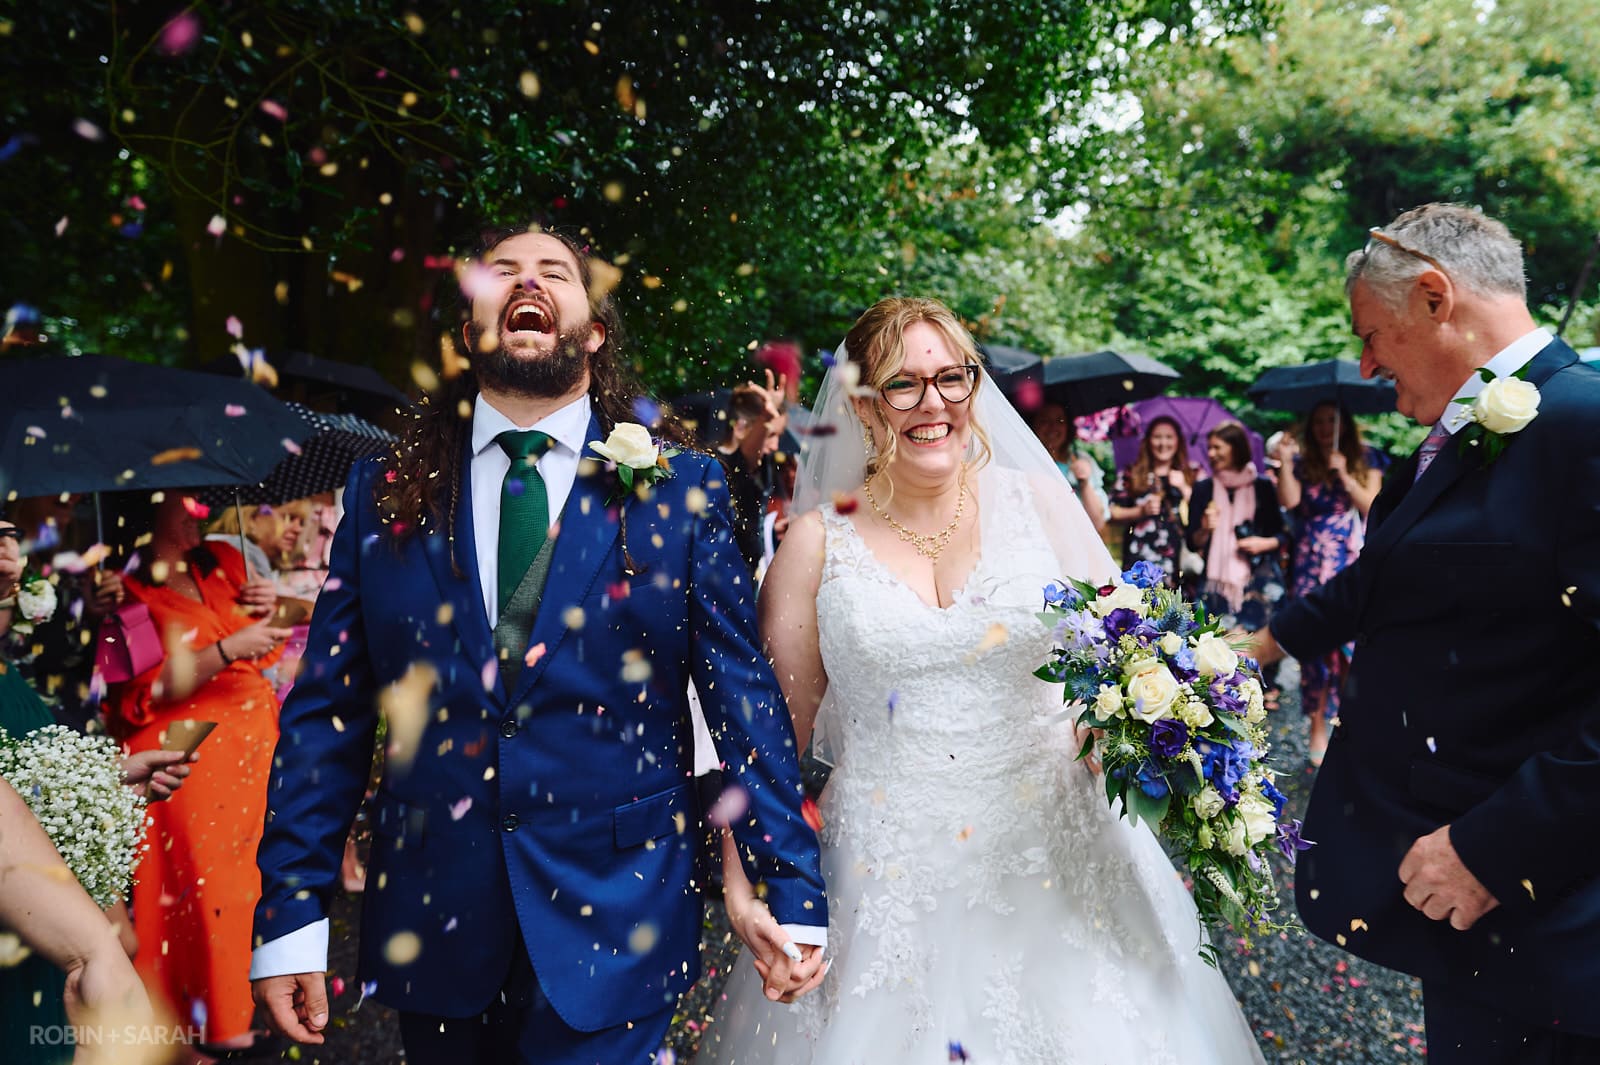 Bride and groom have confetti thrown over them